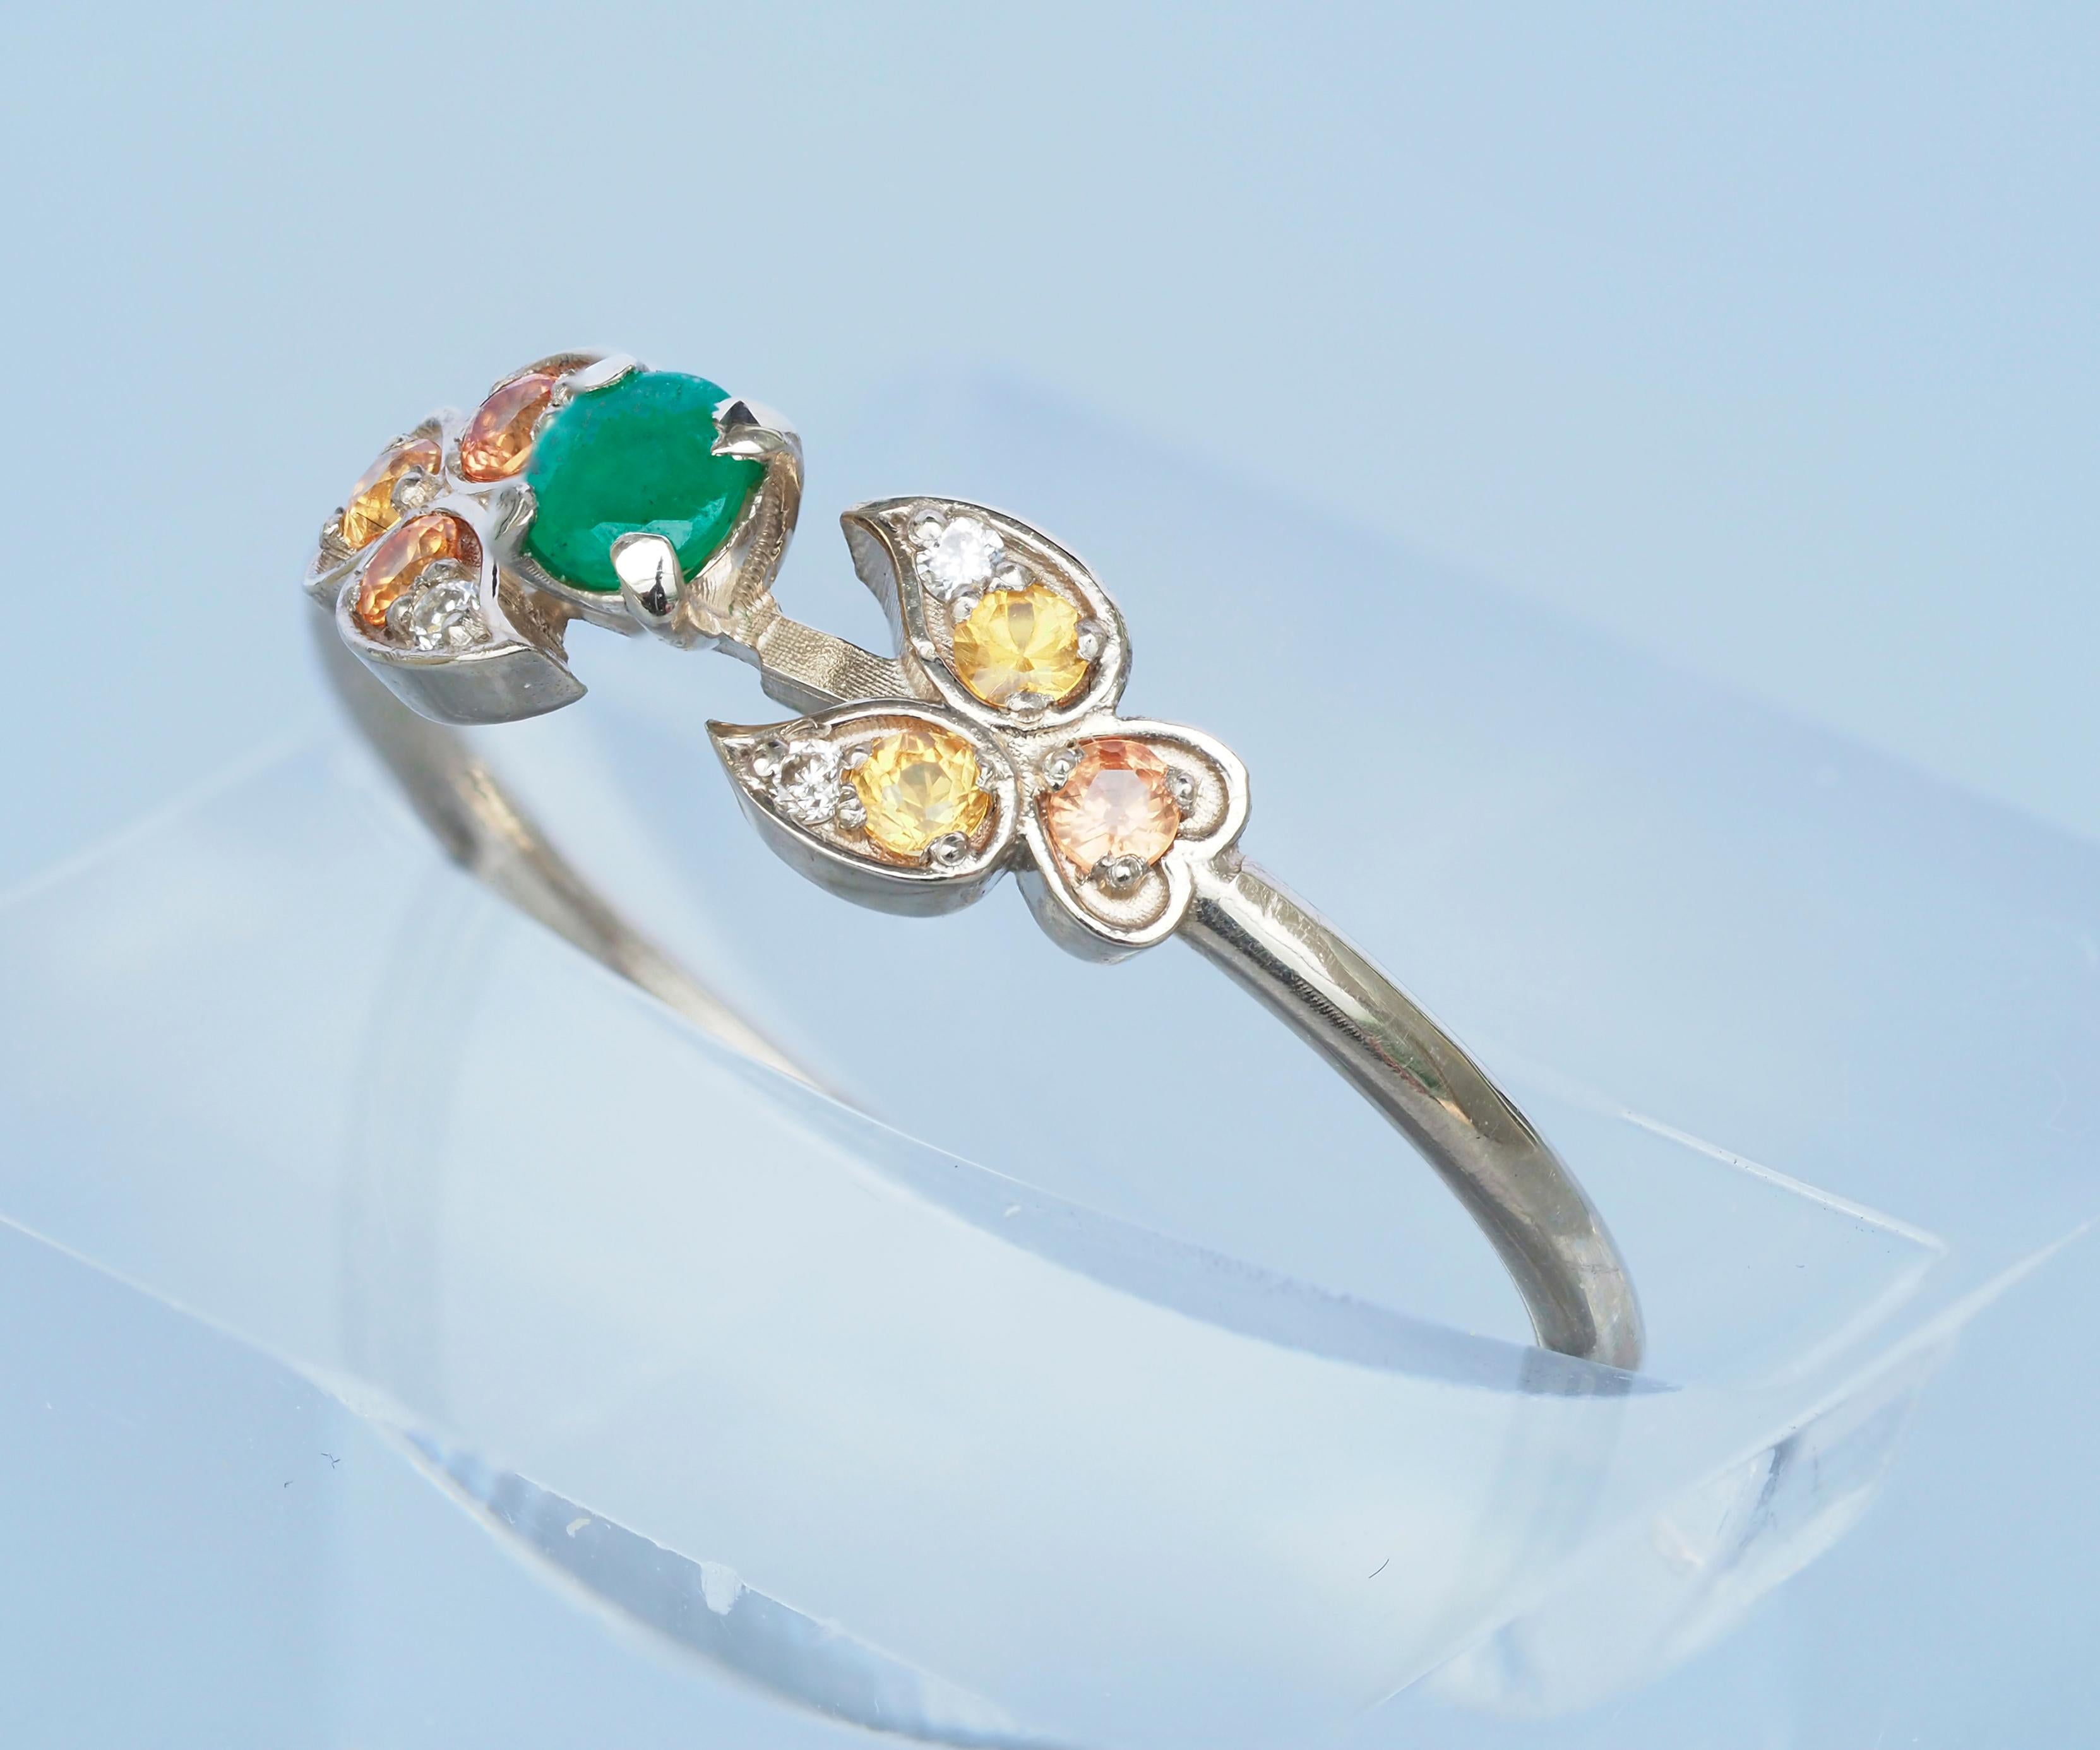 For Sale:  Emerald, Diamonds and Sapphires ring in 14k gold. Tiny ring 7